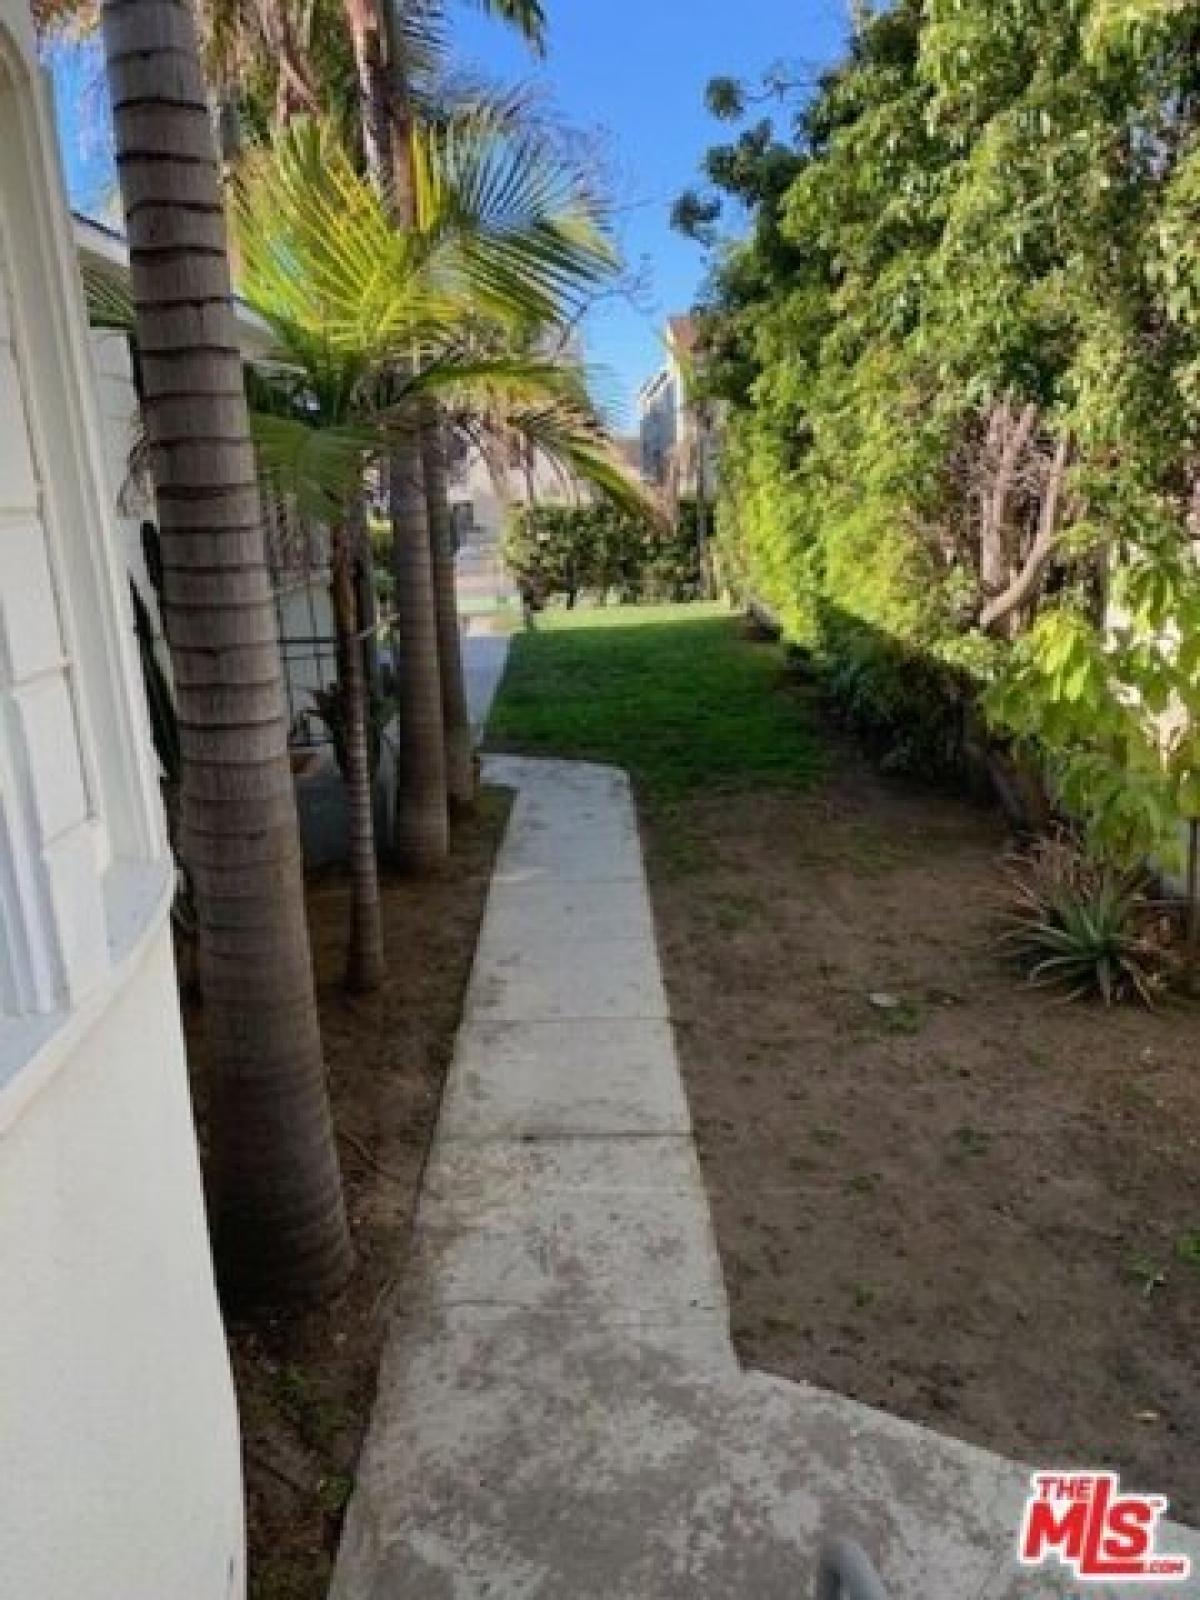 Picture of Home For Rent in Santa Monica, California, United States